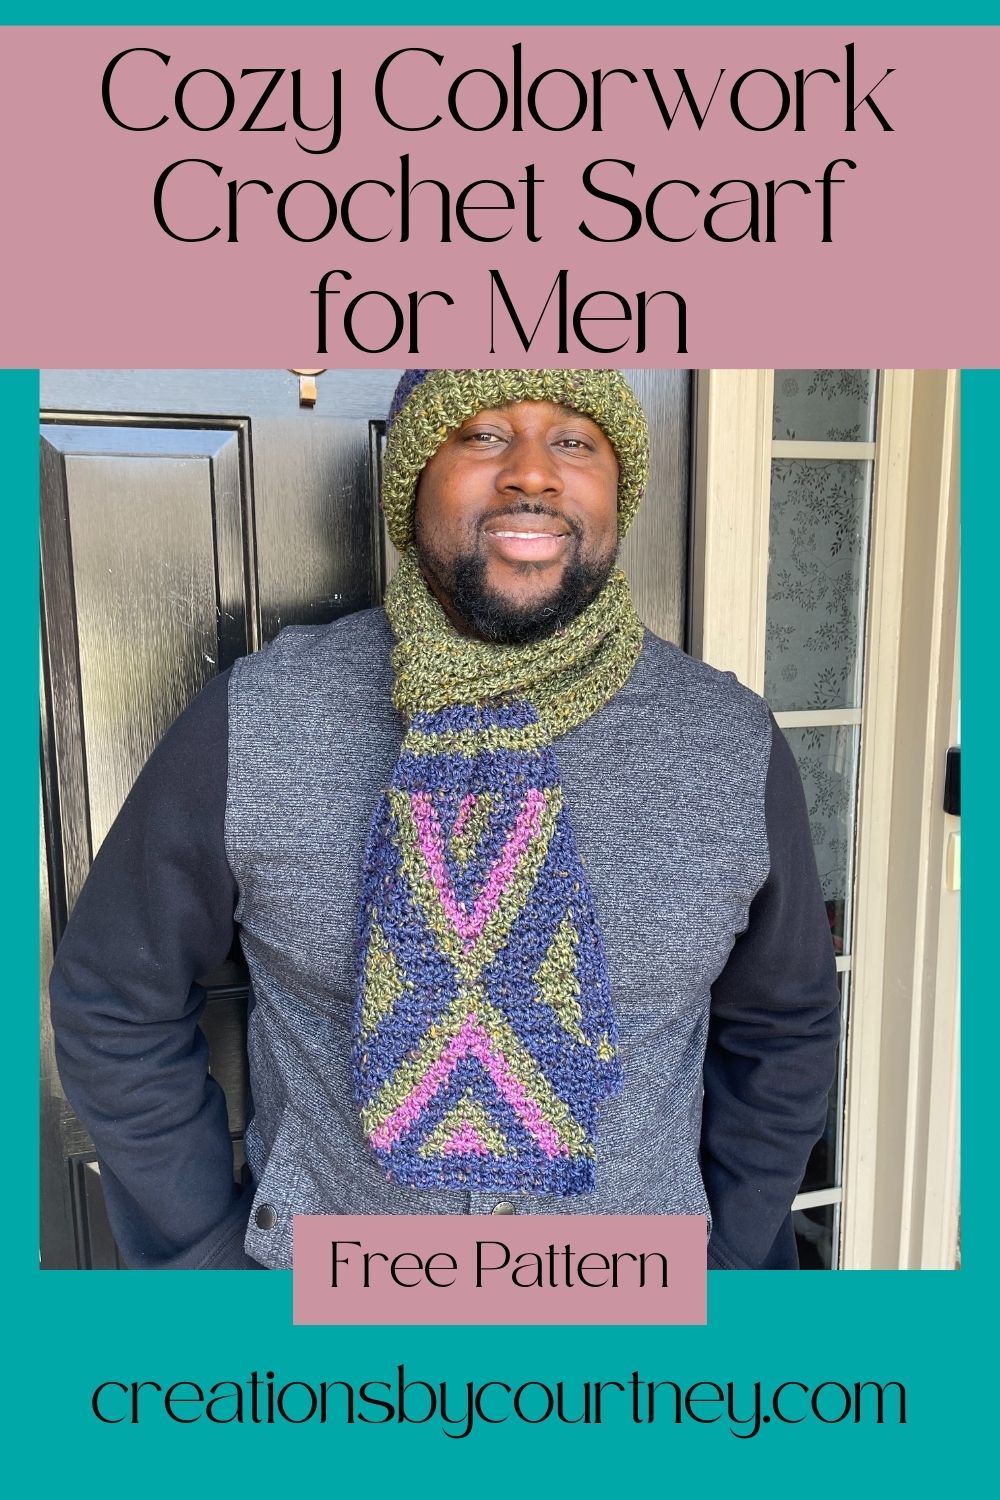 A Pinterest Pin featuring an African American man with a dimple in the left cheek. He is wearing a crochet hat with a green brim that is folded up and a crochet scarf made with green, navy and fuchsia yarn in a textured stitch. The three colors alternate to create standing and inverted triangles at each end of the crochet scarf.